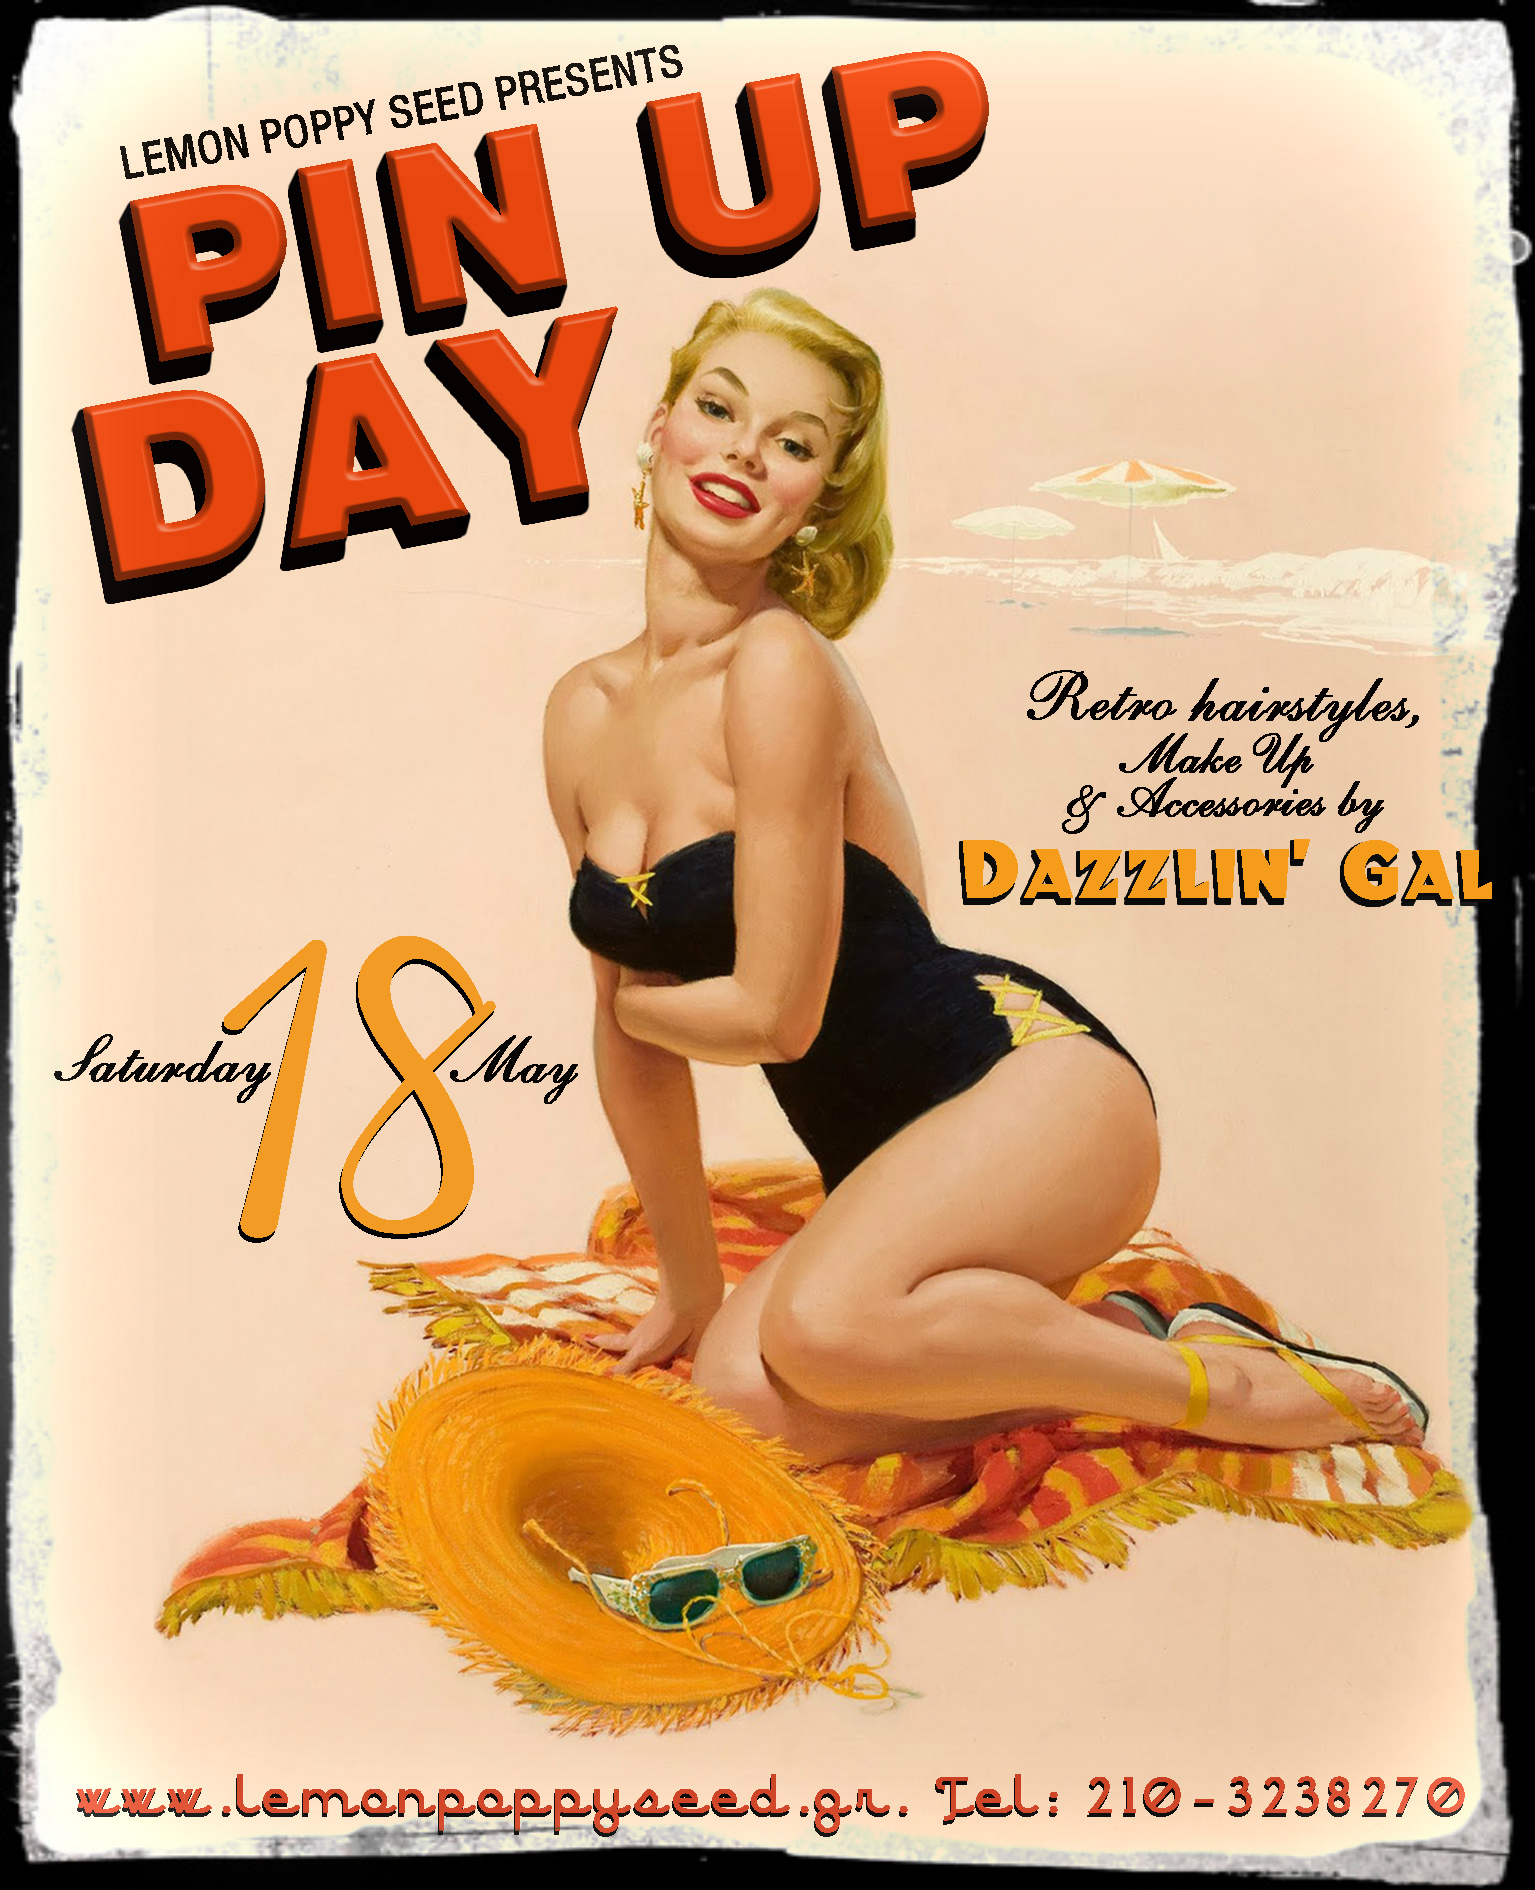 PIN UP DAY with Dazzlin’ Gal